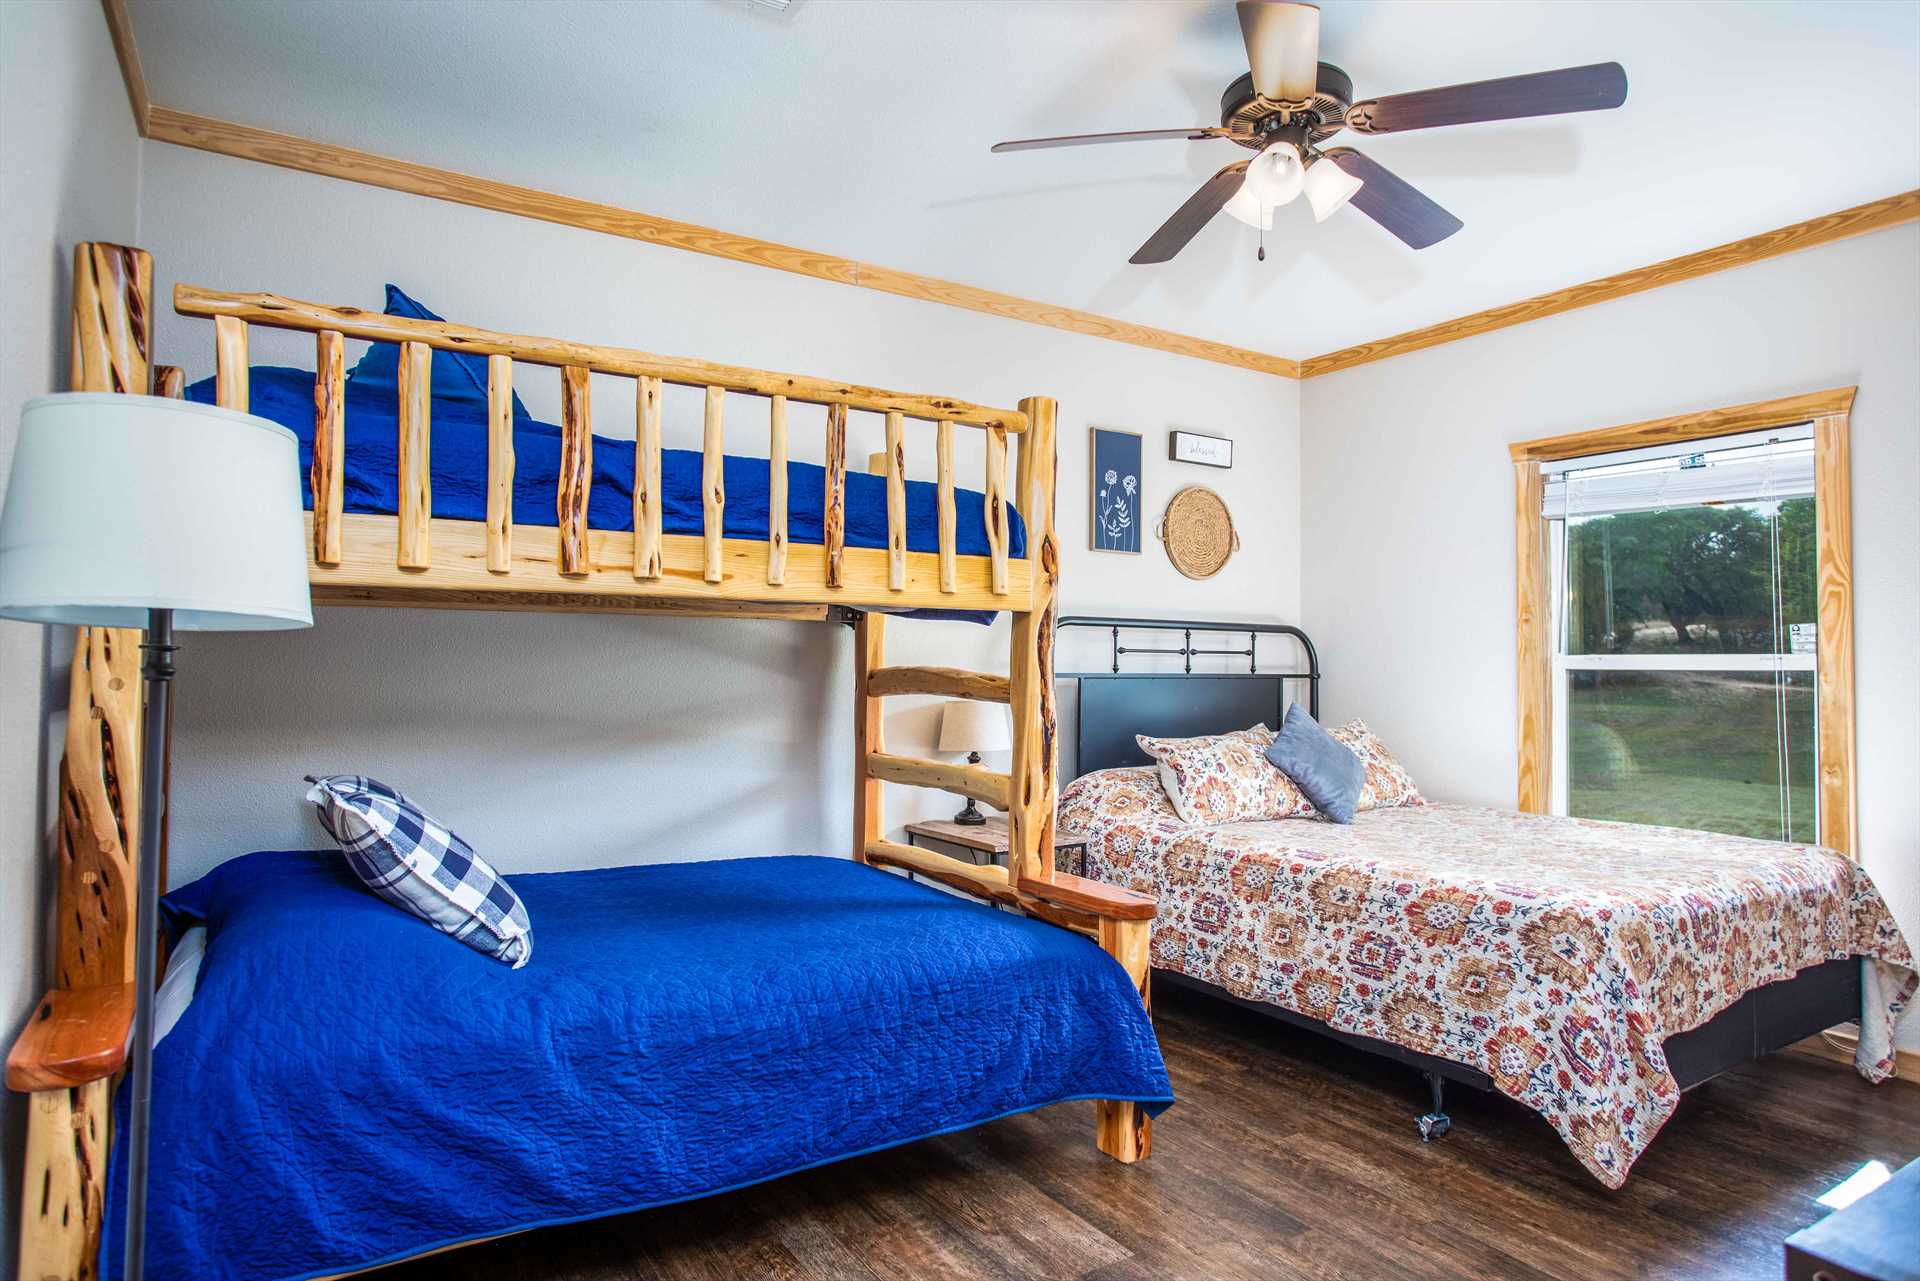                                                 Kids love the bunk bed setup in the third bedroom! There's also a queen-sized bed in there.